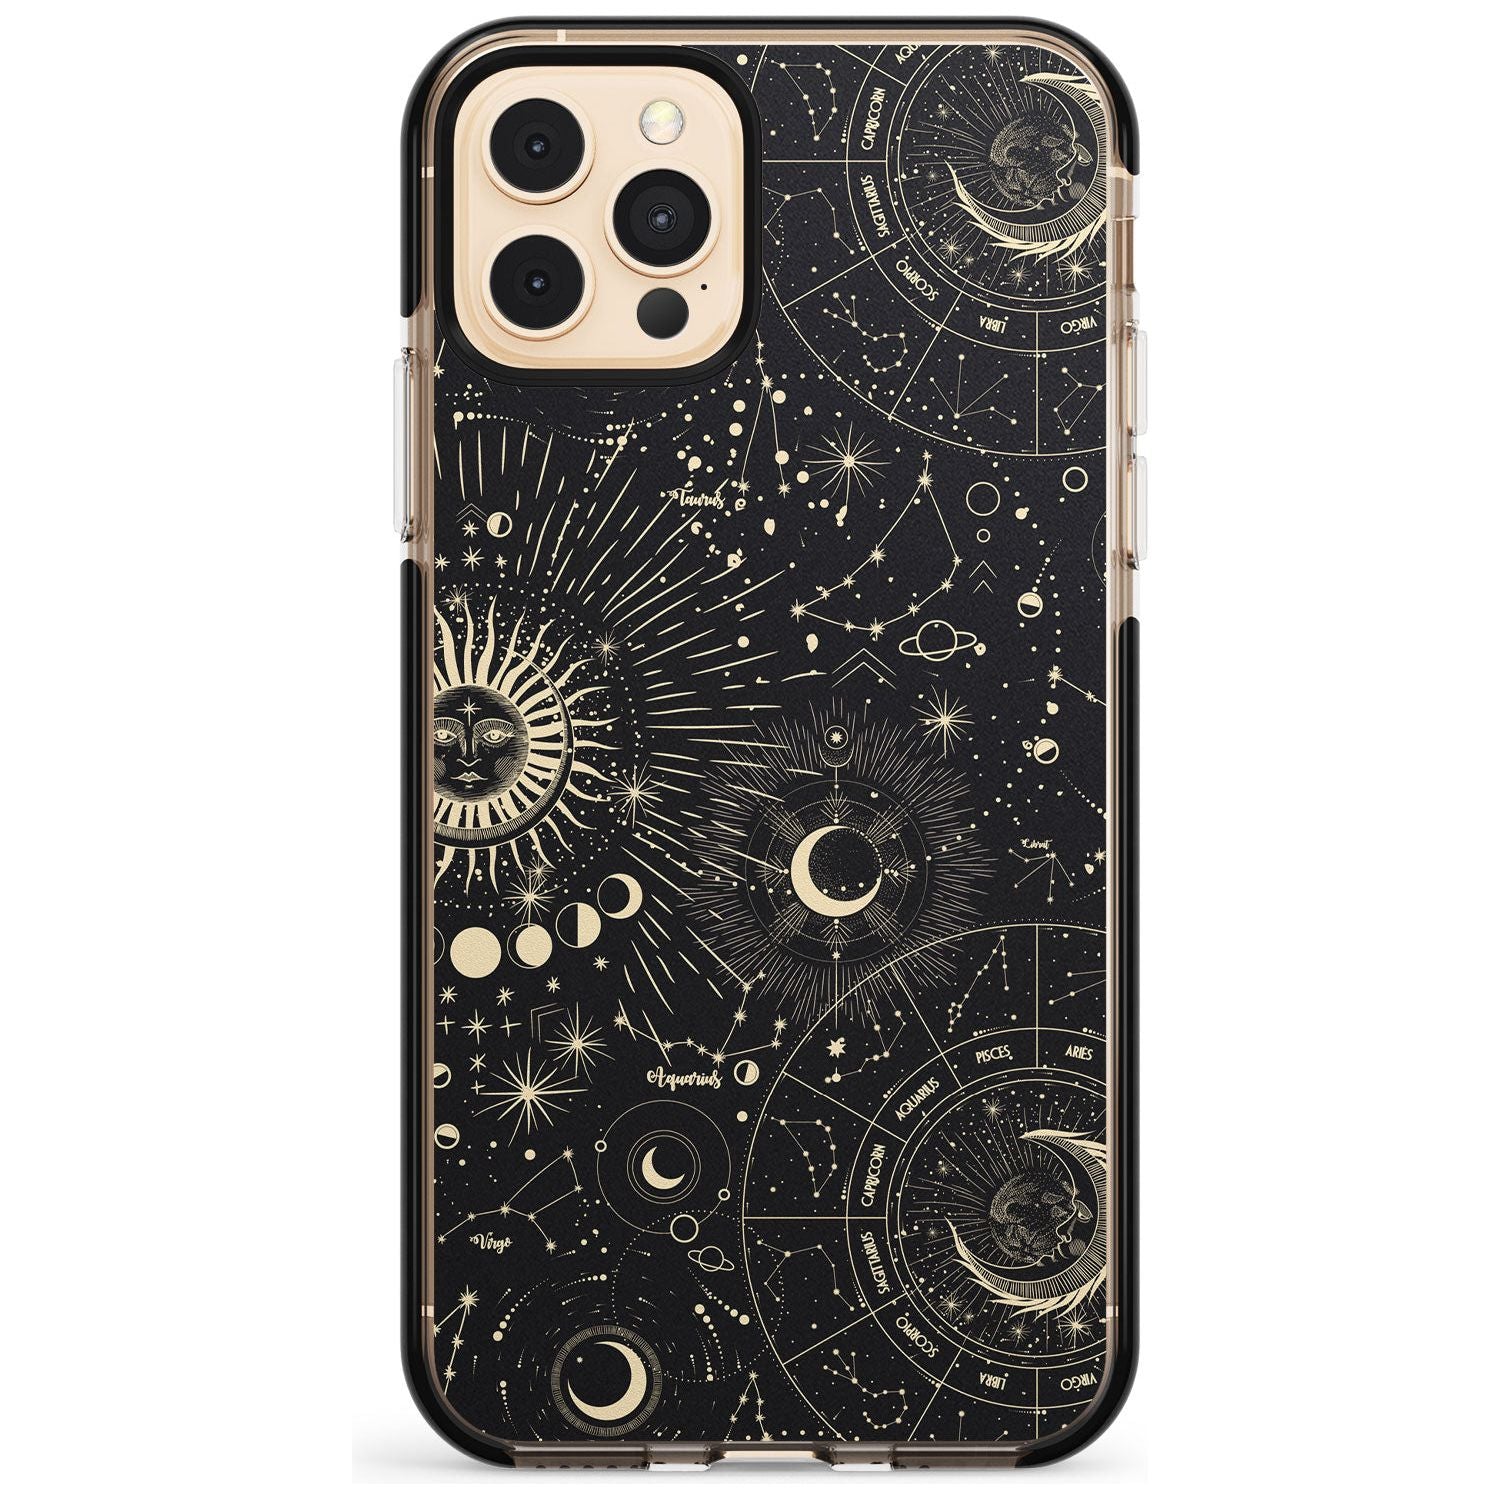 Suns & Zodiac Charts Pink Fade Impact Phone Case for iPhone 11